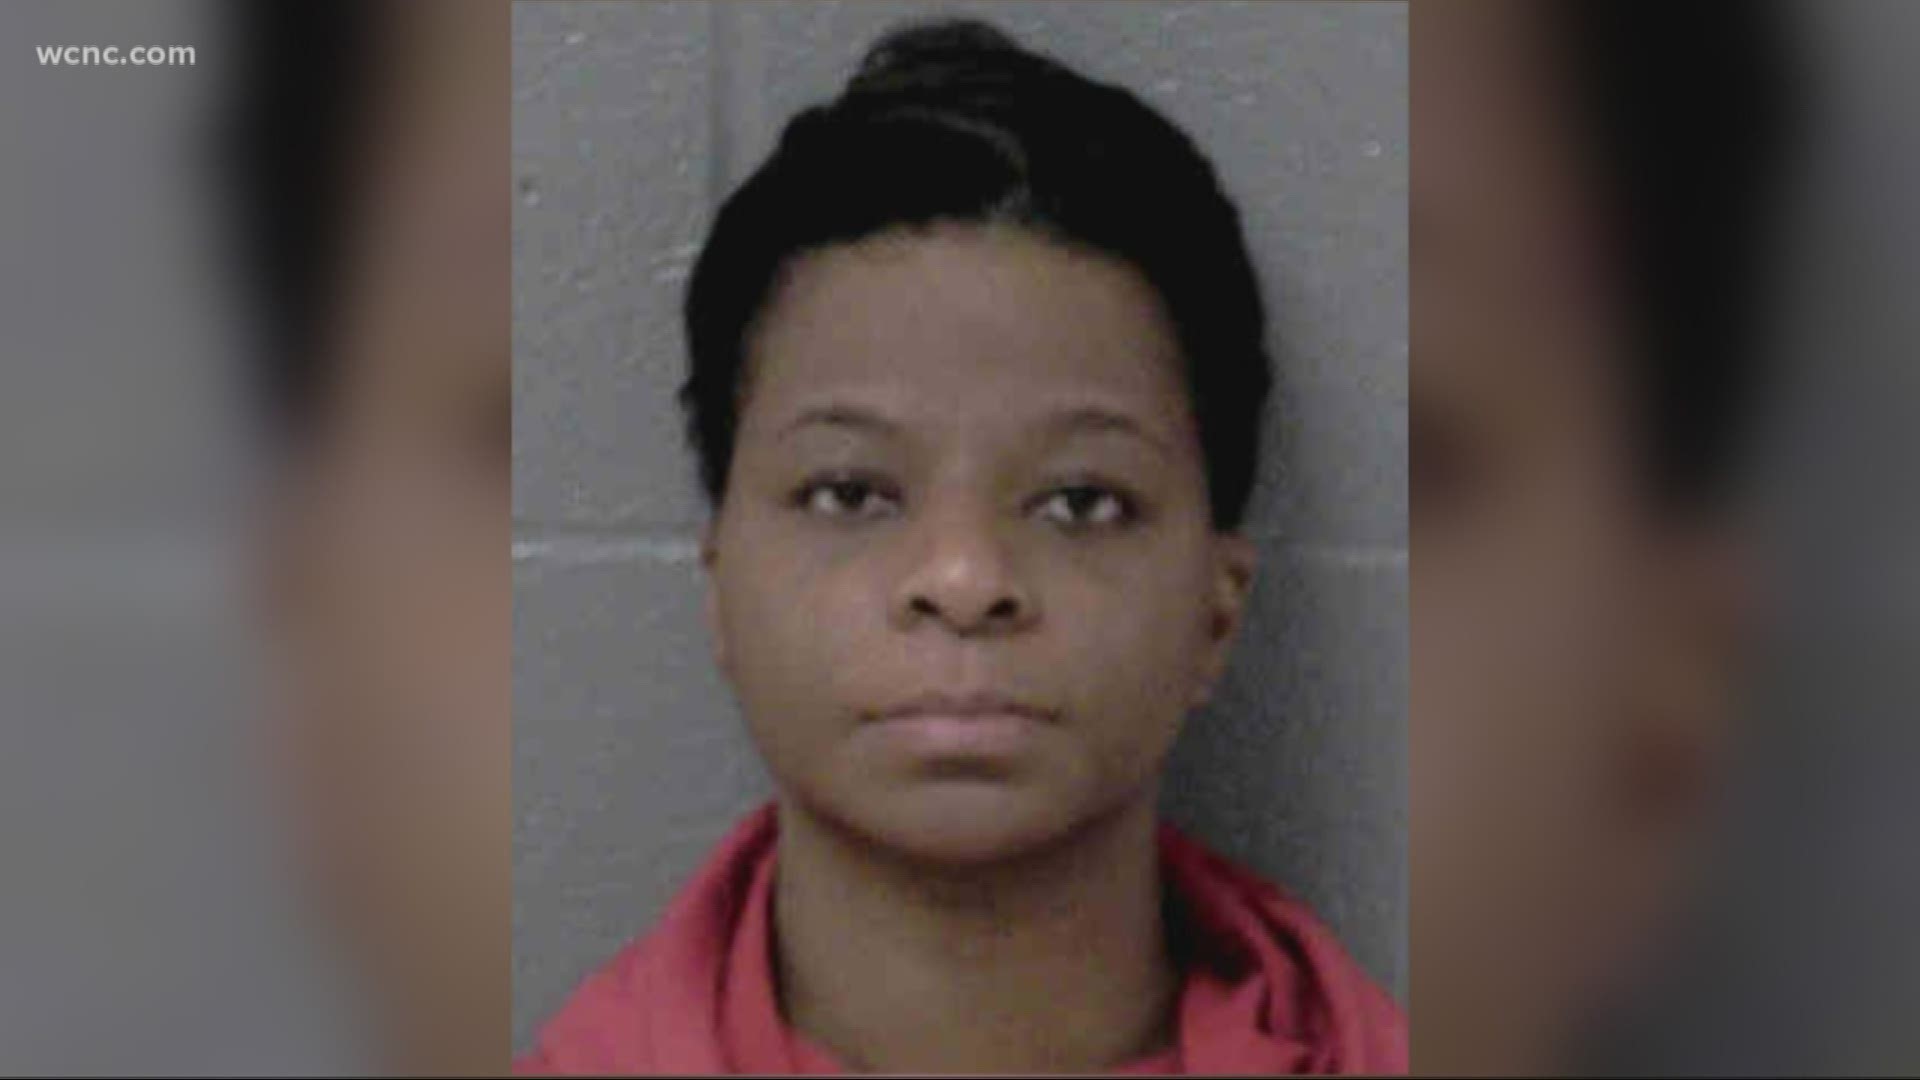 Minique Jackson, 38, was arrested after a domestic violence incident on Wednesday morning at her home, the sheriff of Mecklenburg County said.